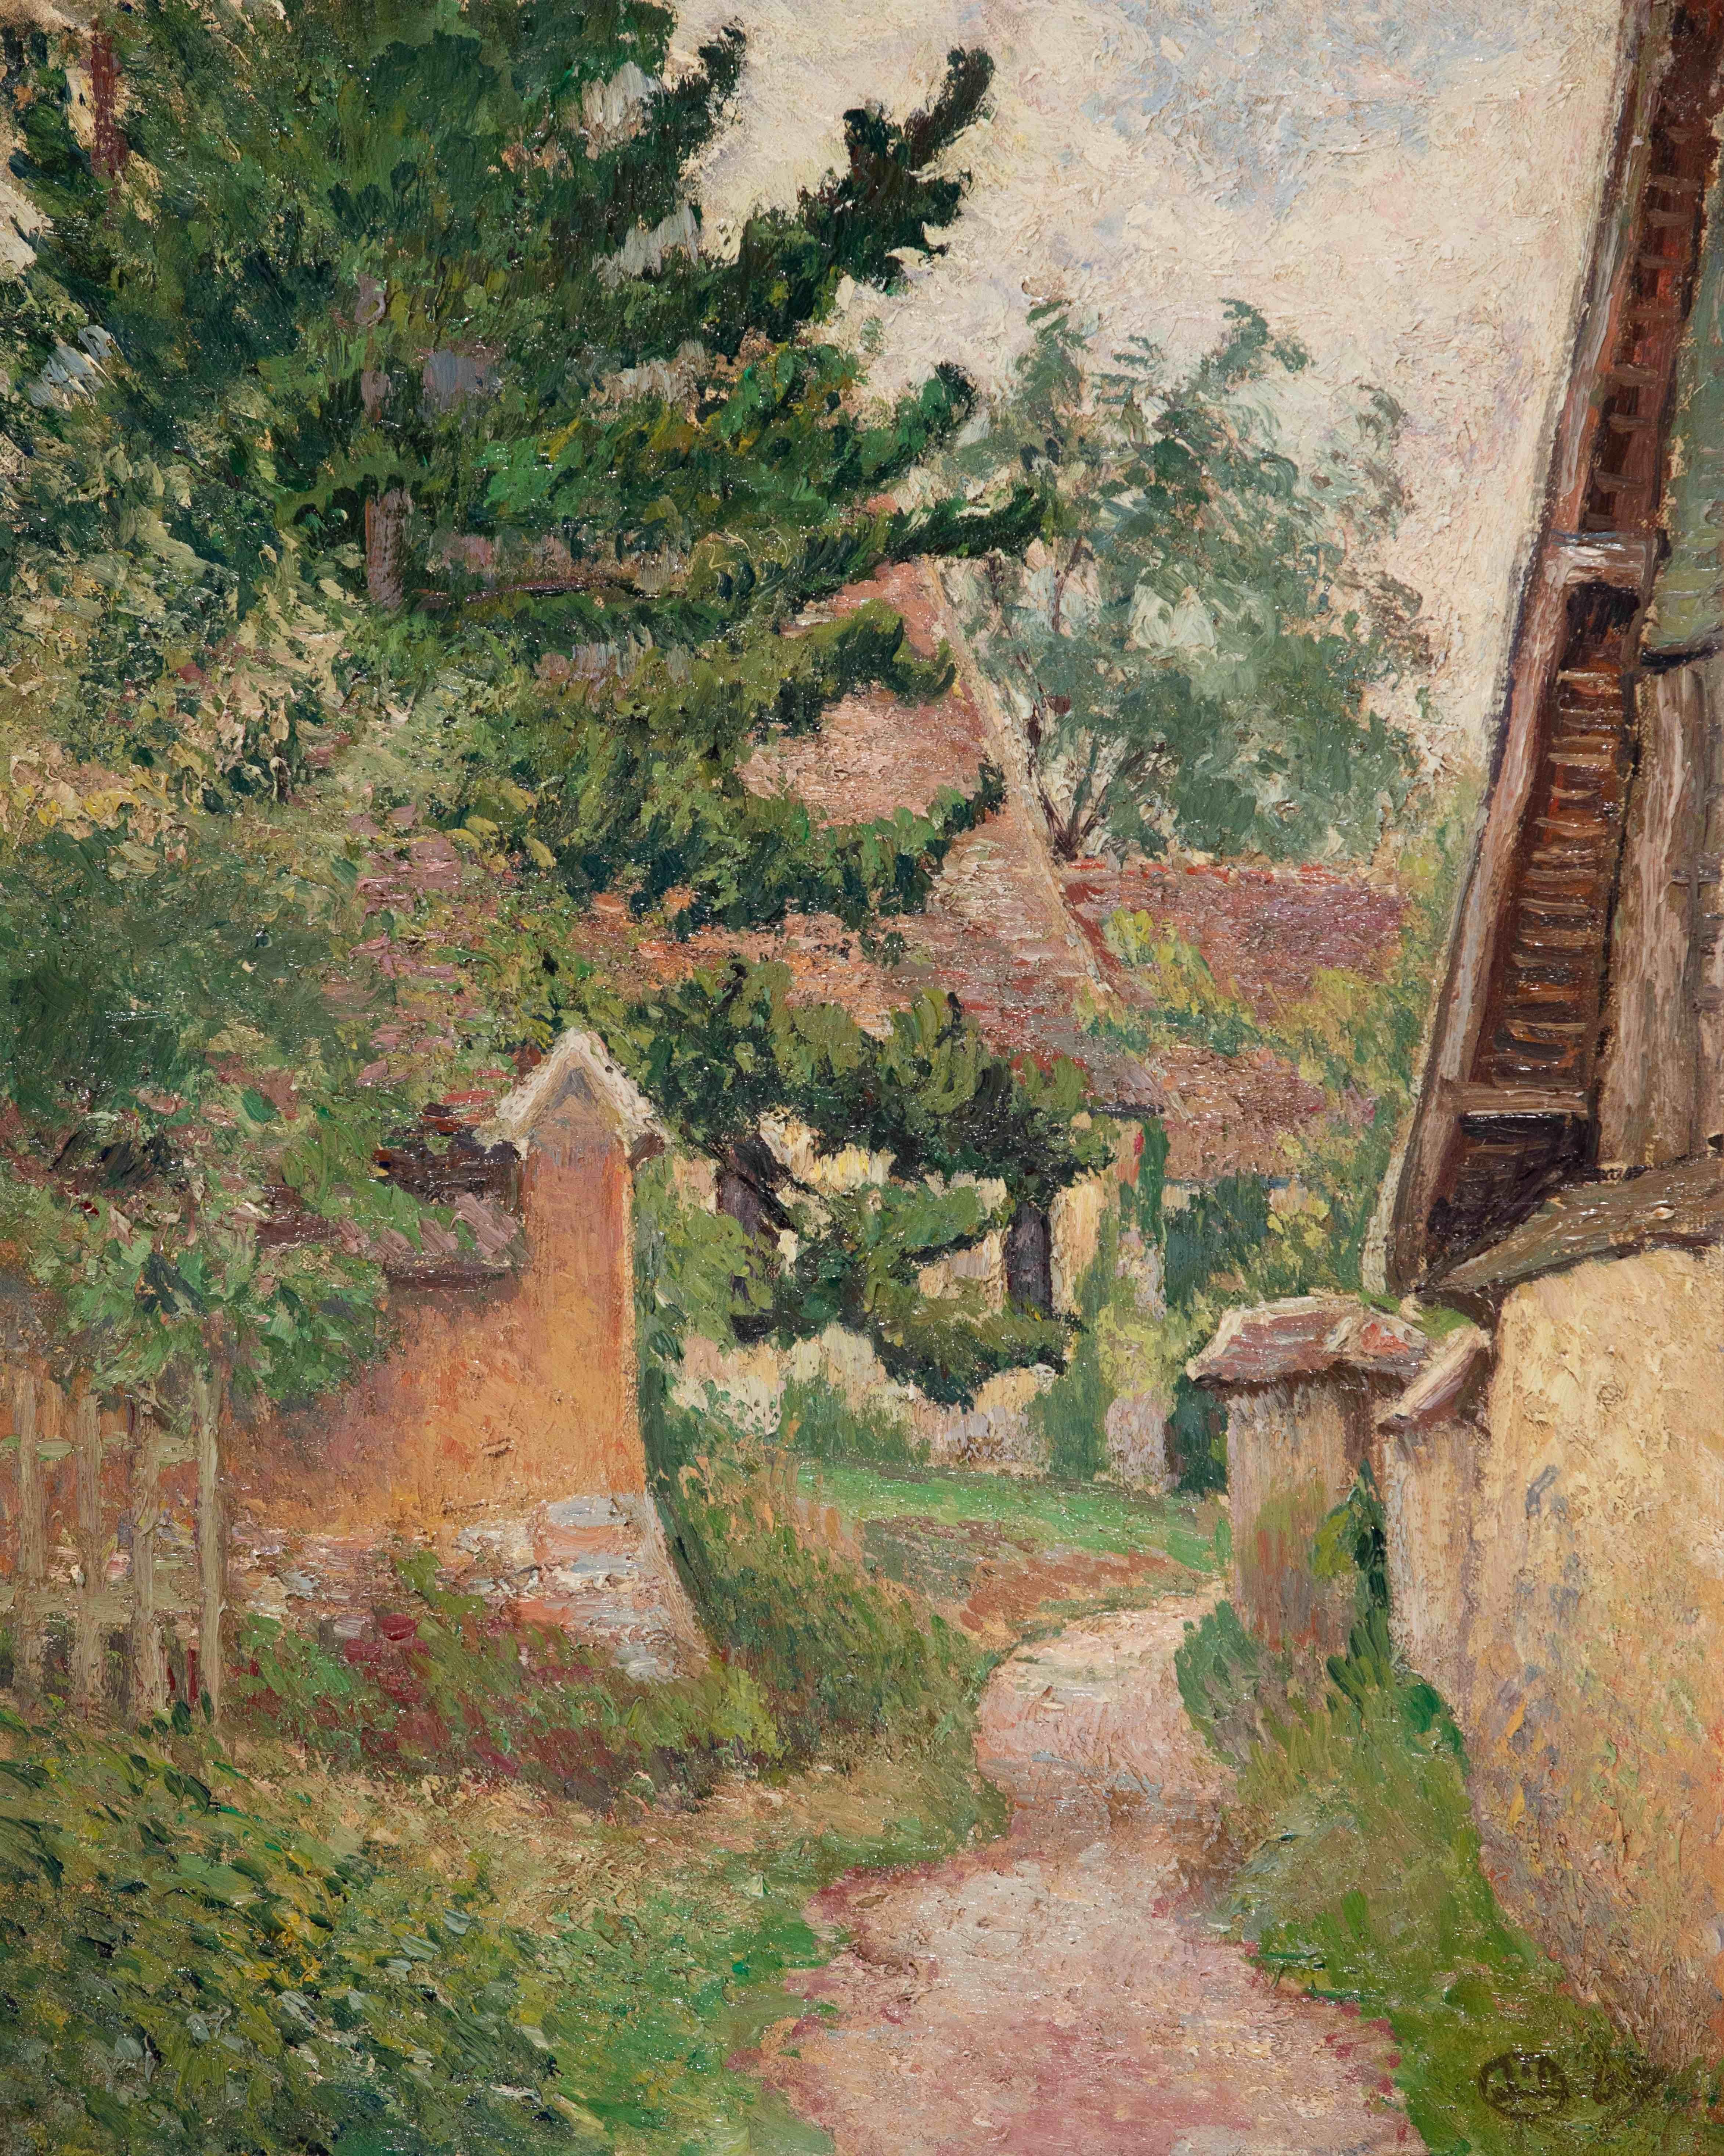 *PLEASE NOTE UK BUYERS WILL ONLY PAY 5% VAT ON THIS PURCHASE.

La Sente de l'Eglise, Bazincourt by Lucien Pissarro (1863-1944)
Oil on canvas
41.2 x 33 cm (16 ¹/₄ x 13 inches)
Monogrammed and dated lower right, LP 07
Executed in 1907

Provenance: